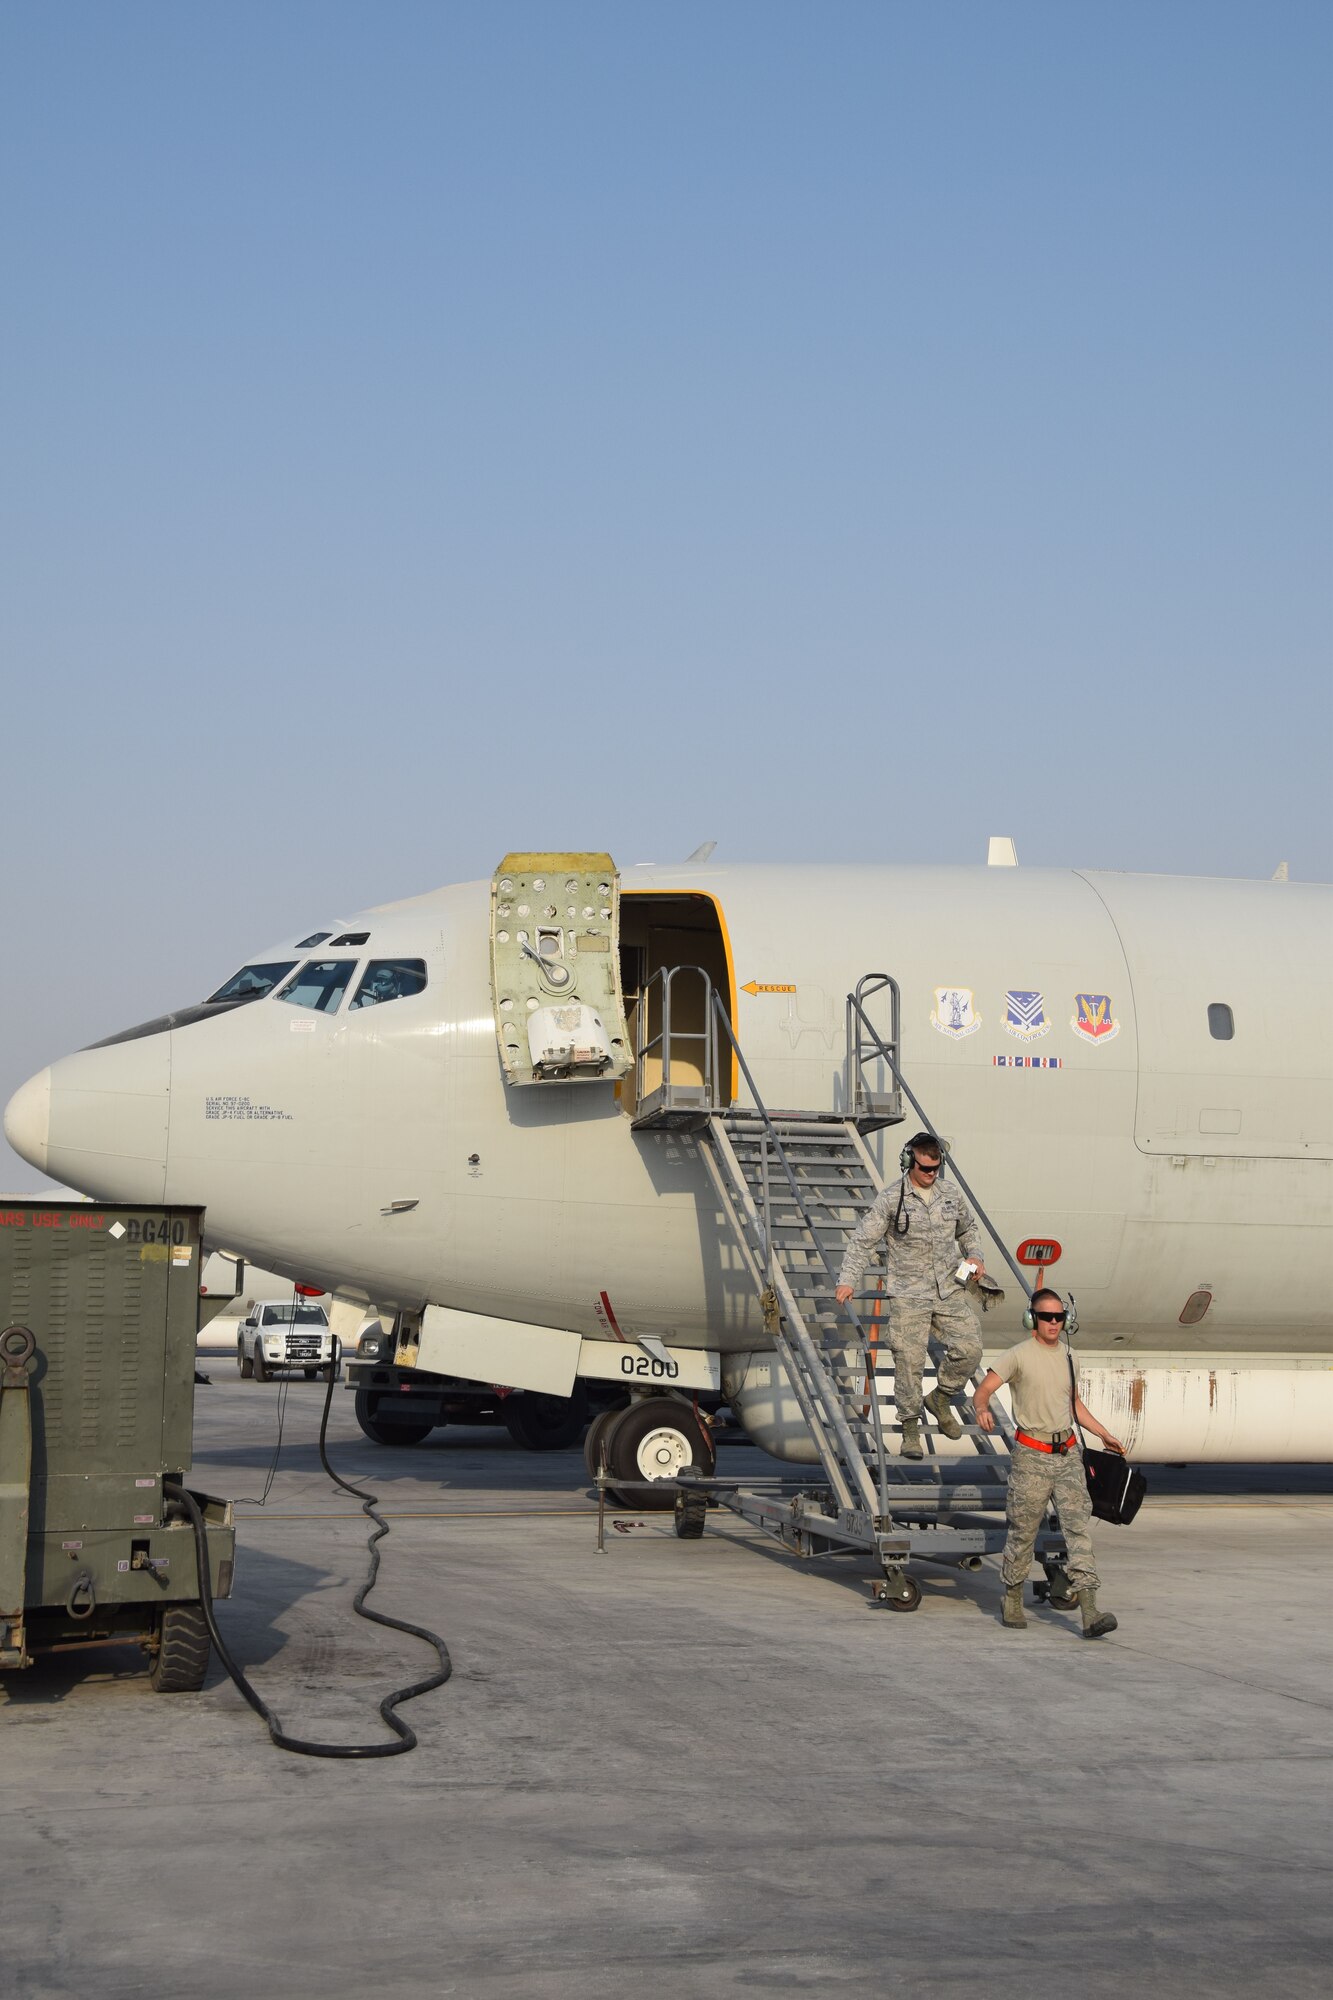 Crew chiefs from the 7th Expeditionary Air Mobility Unit exit a E-8C Joint Surveillance Target Attack Radar System prior to a mission on Sept. 12, 2016, at Al Udeid Air Base, Qatar. The JSTARS uses its communicaiton and radar systems support ground units and direct air support throughout the area of responisbility. (U.S. Air Force photo/Tech. Sgt. Carlos J. Trevino/Released)